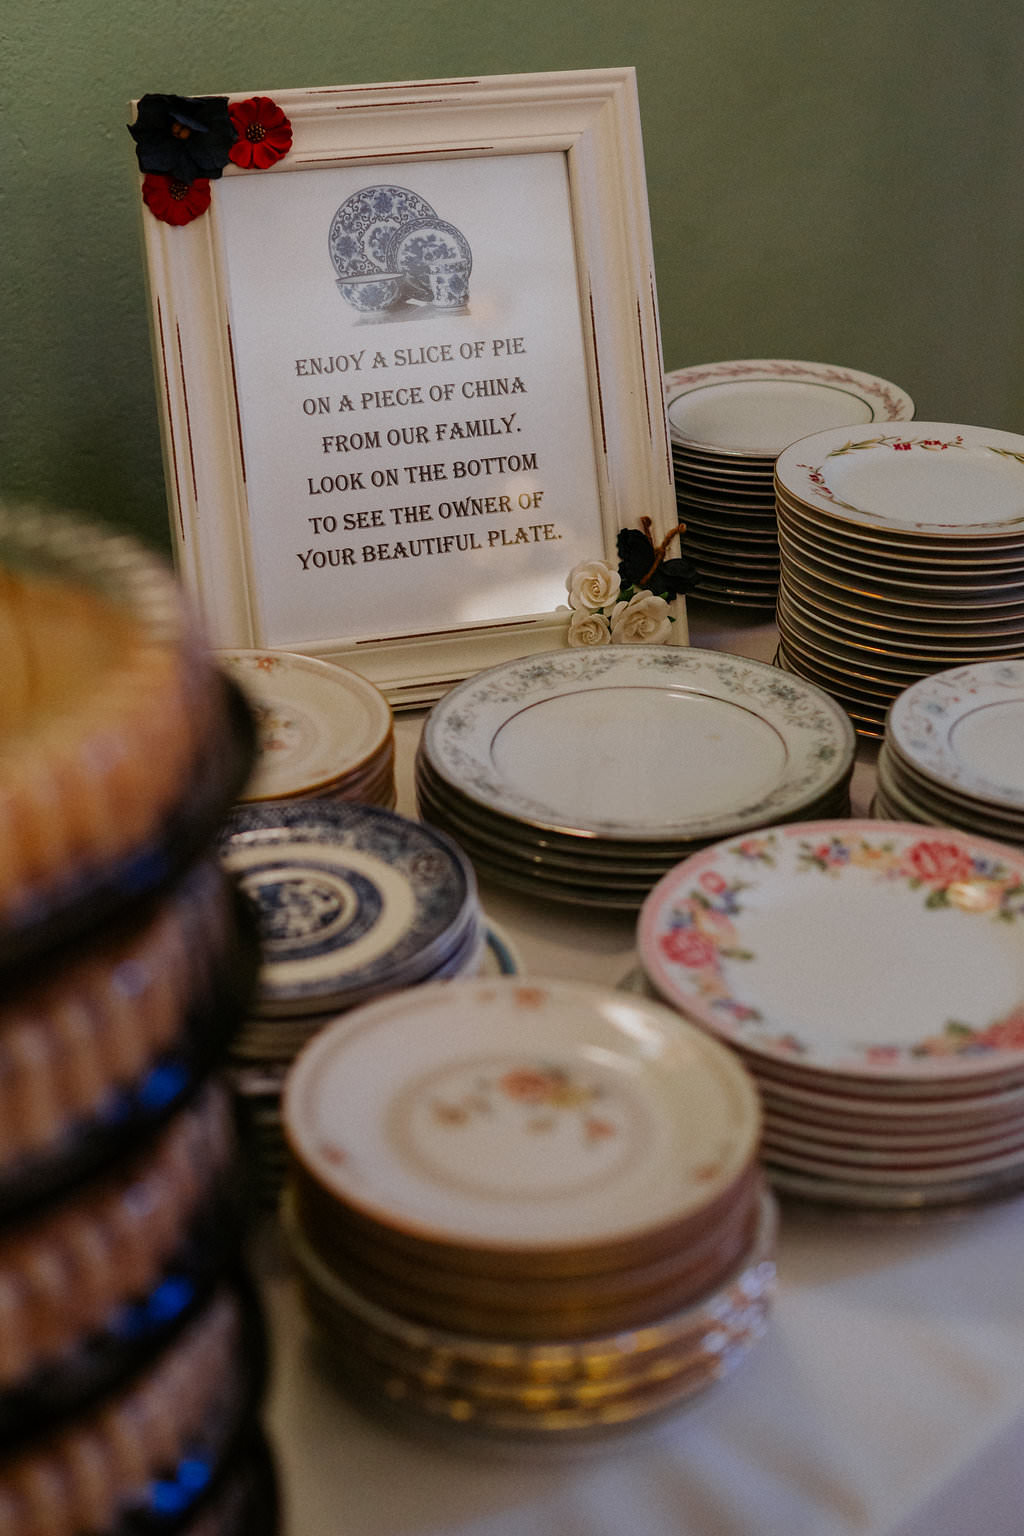 Wedding Dessert Table with Vintage Mismatched Porcelain China Plates and Printed Sign with Red White and Blue Floral Painted Frame, and Pies | Tampa Bay Wedding Planner Special Moments Event Planning